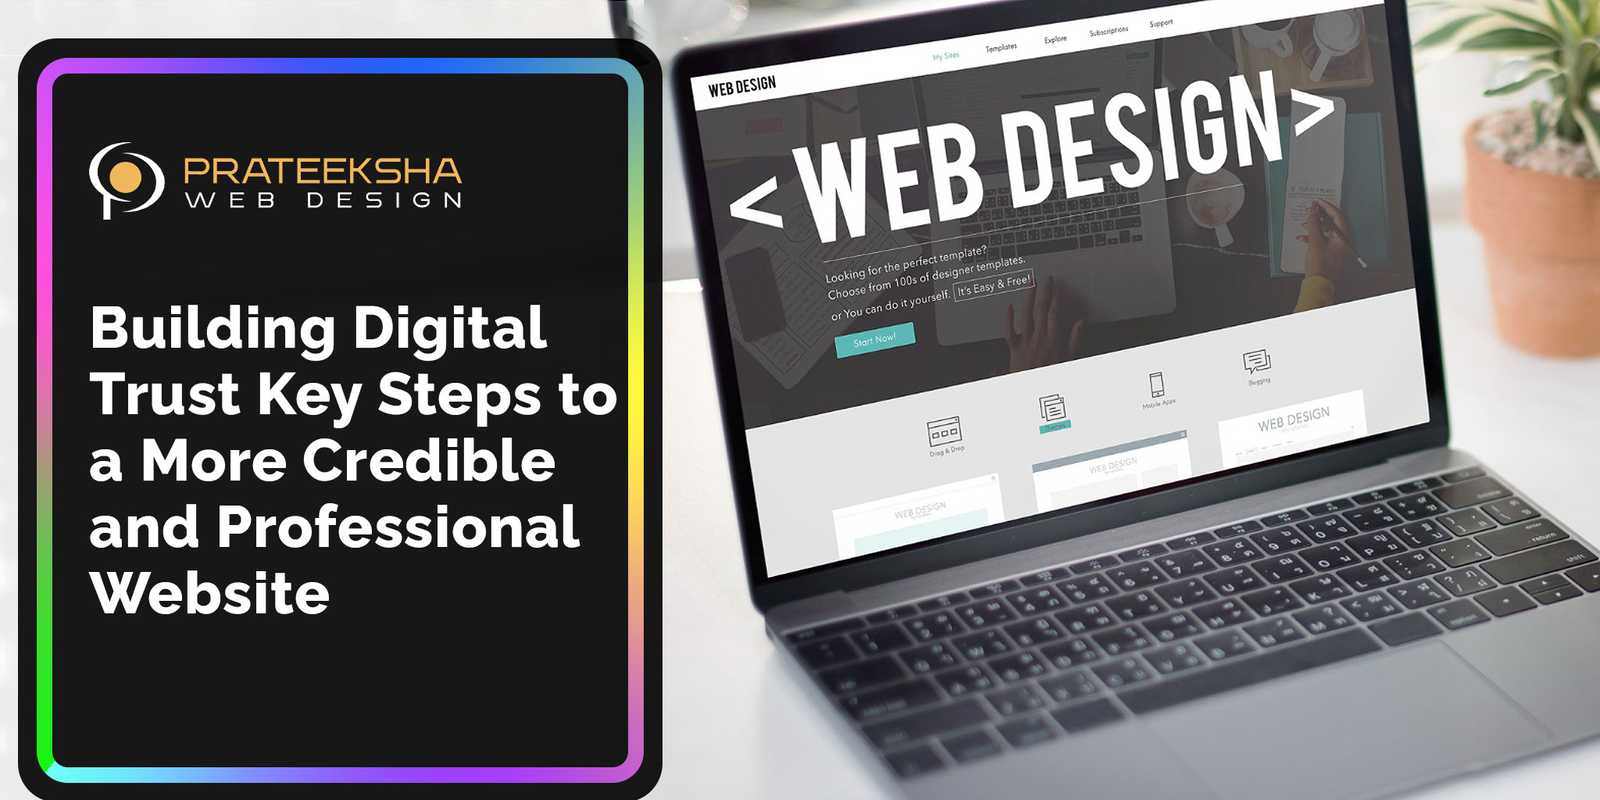 Building Digital Trust Key Steps to a More Credible and Professional Website